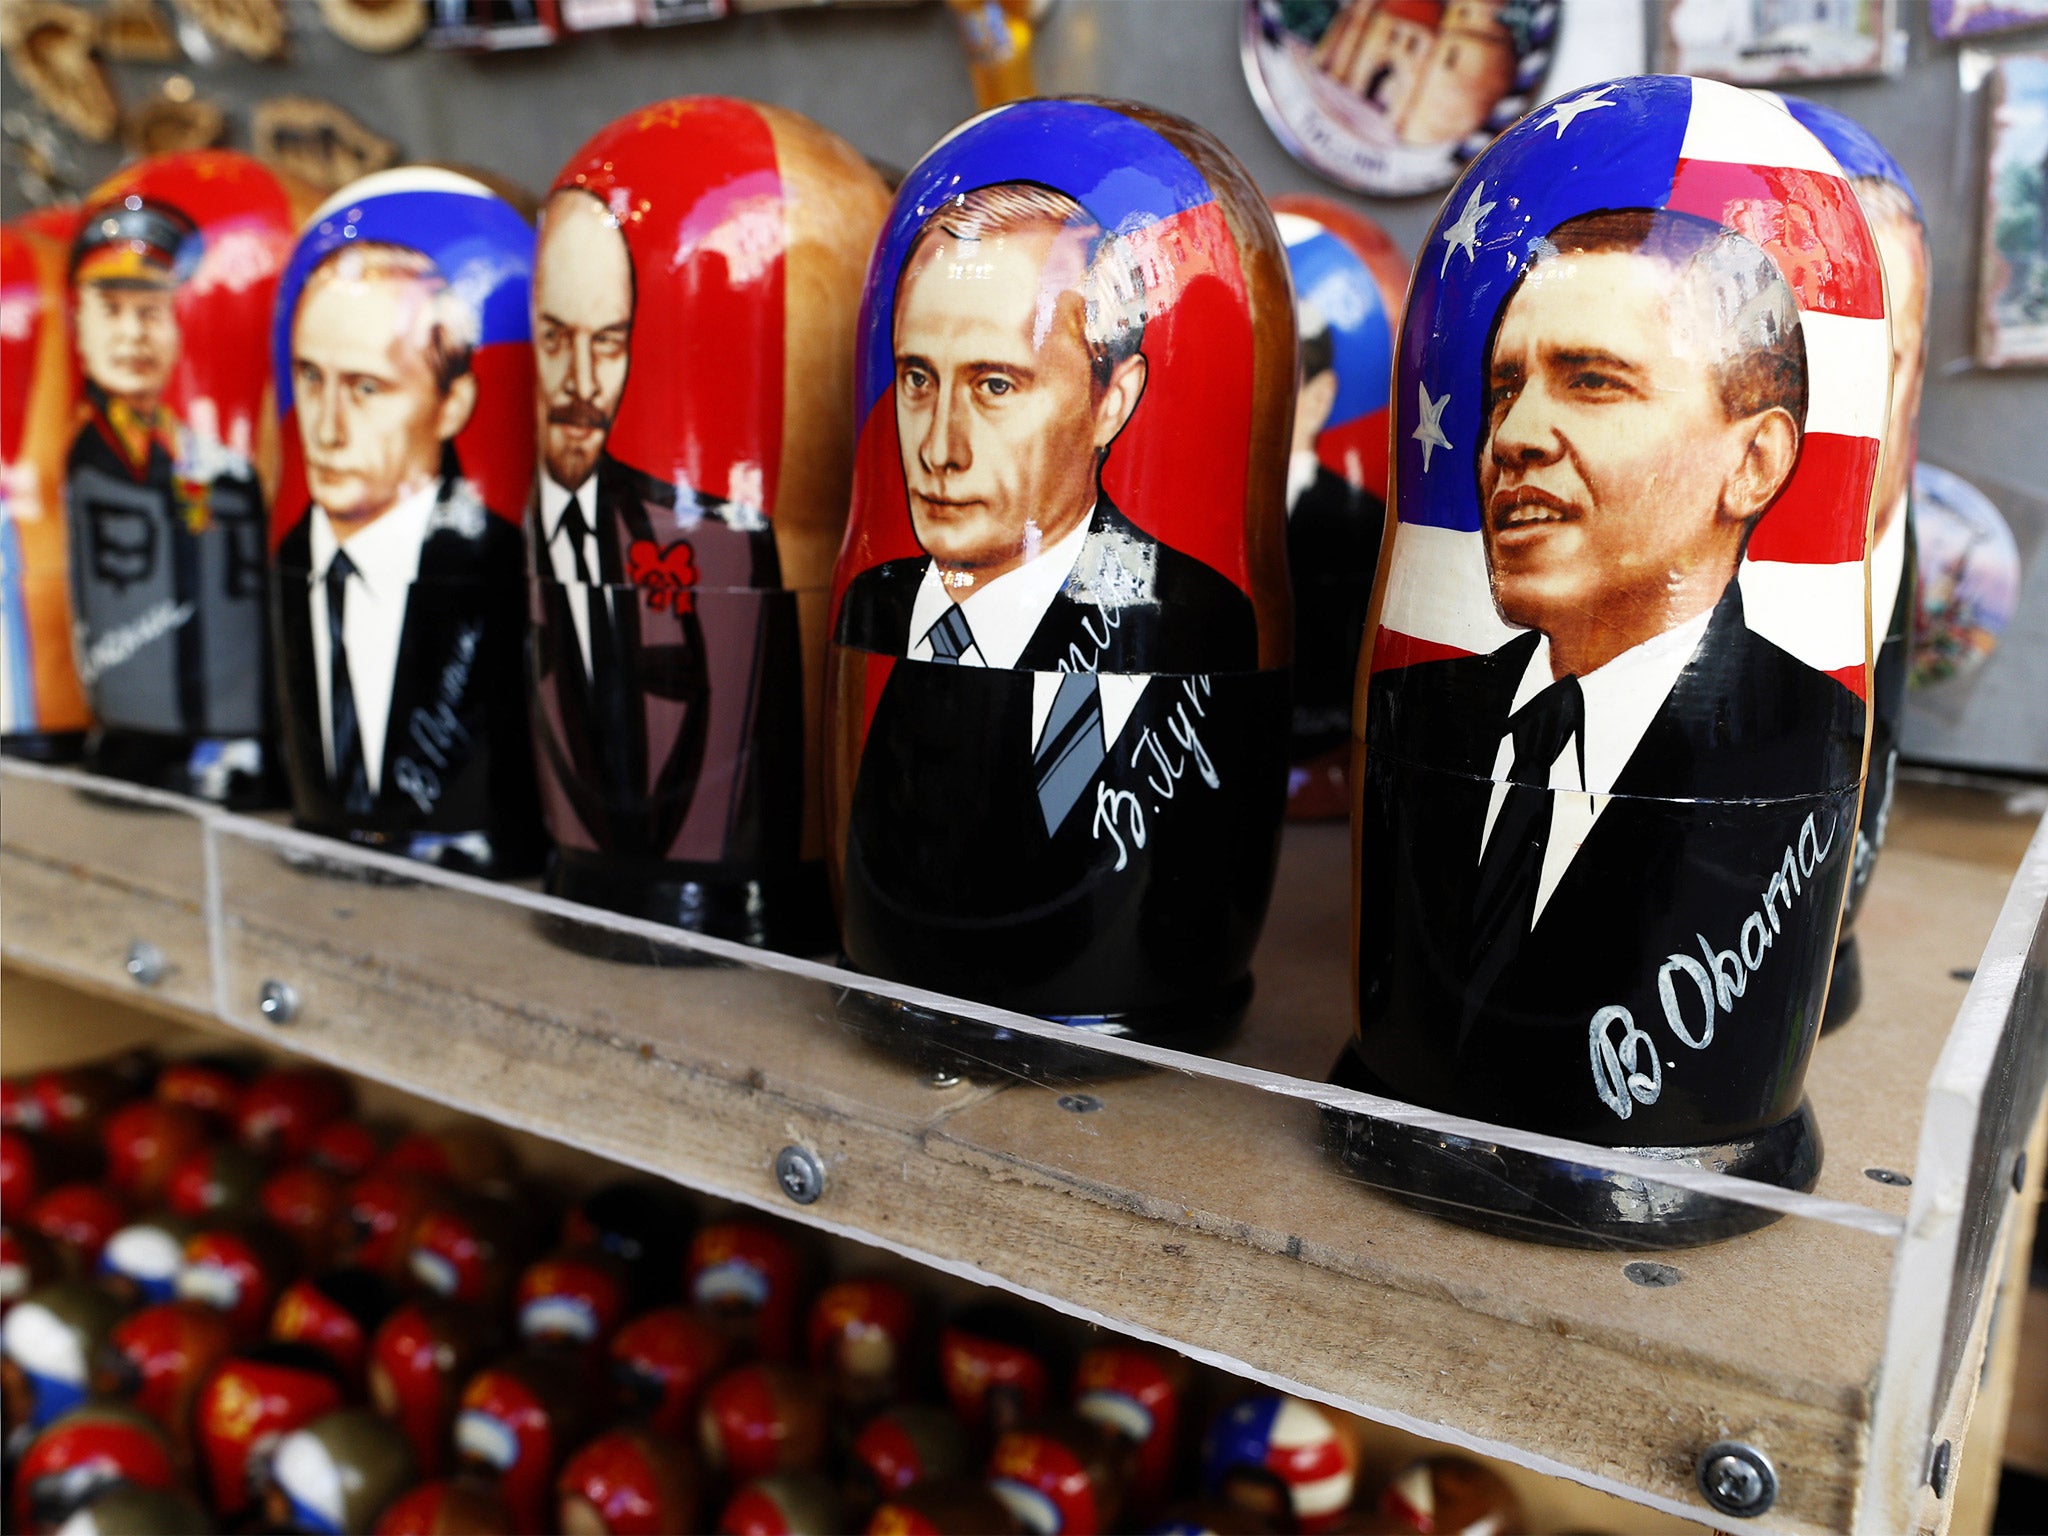 Russian wooden dolls depicting Barack Obama and Vladimir Putin displayed in Estonia. The US President is under pressure to take action against his Russian counterpart